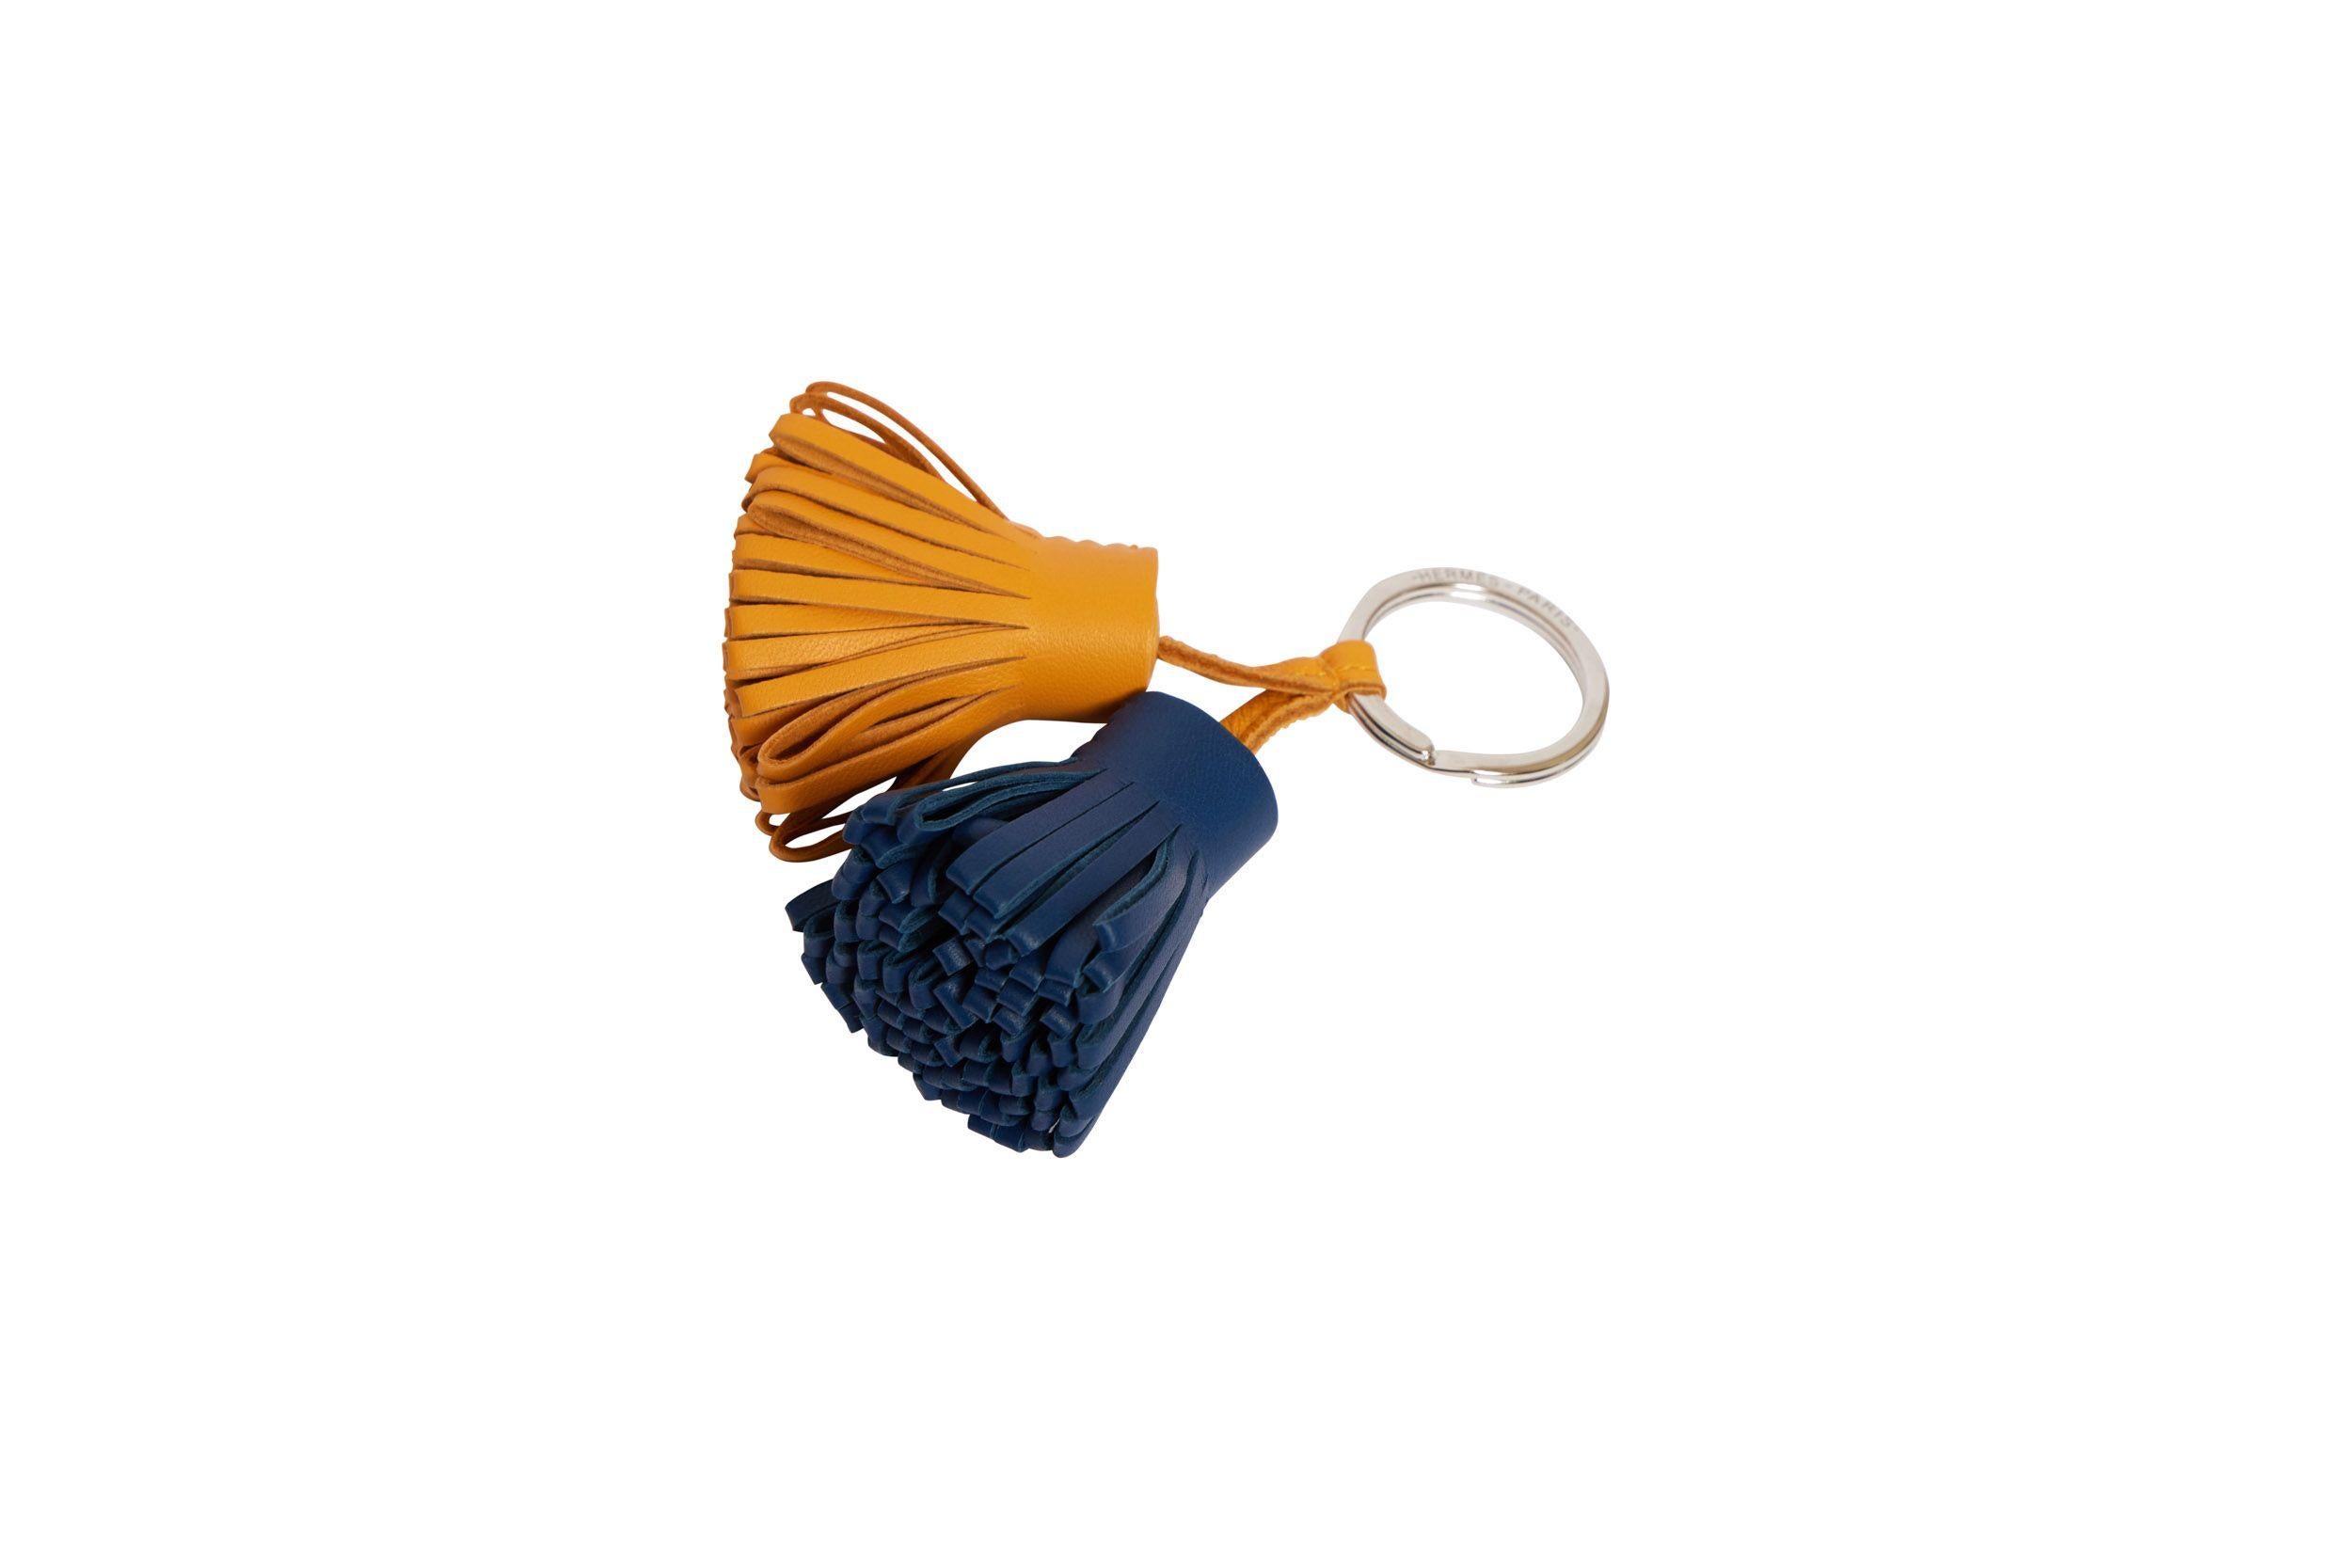 Hermes curry and deep blue leather double Carmen tassel keychain. The ring is crafted of palladium metal. The piece is brand new and comes with the original box, ribbon and shopping bag.